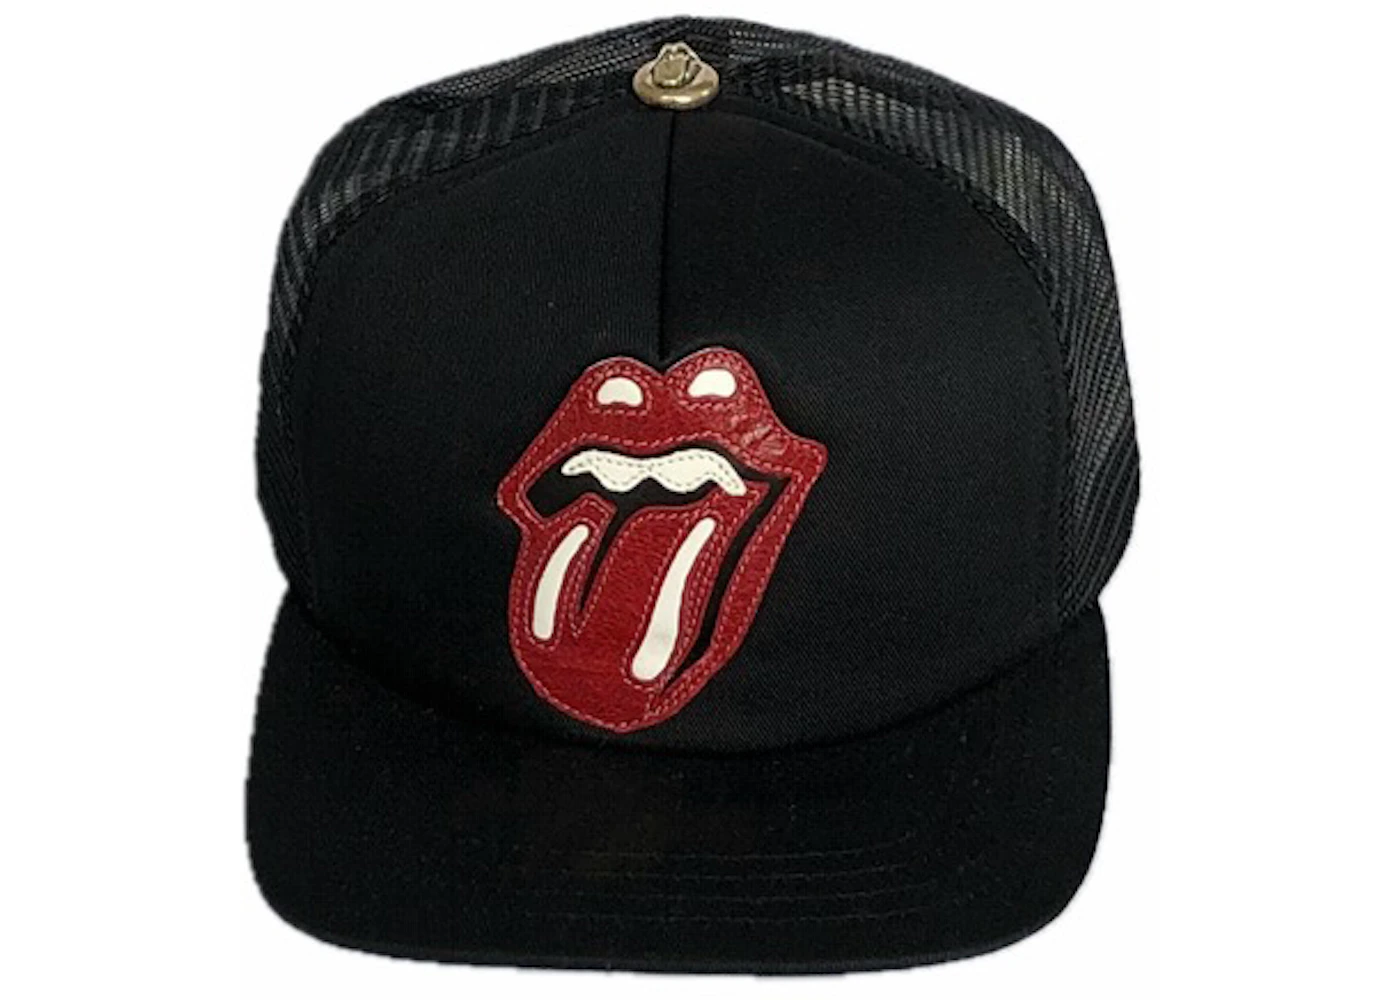 Chrome Hearts x Rolling Stones Leather Patch Trucker Hat Black - US